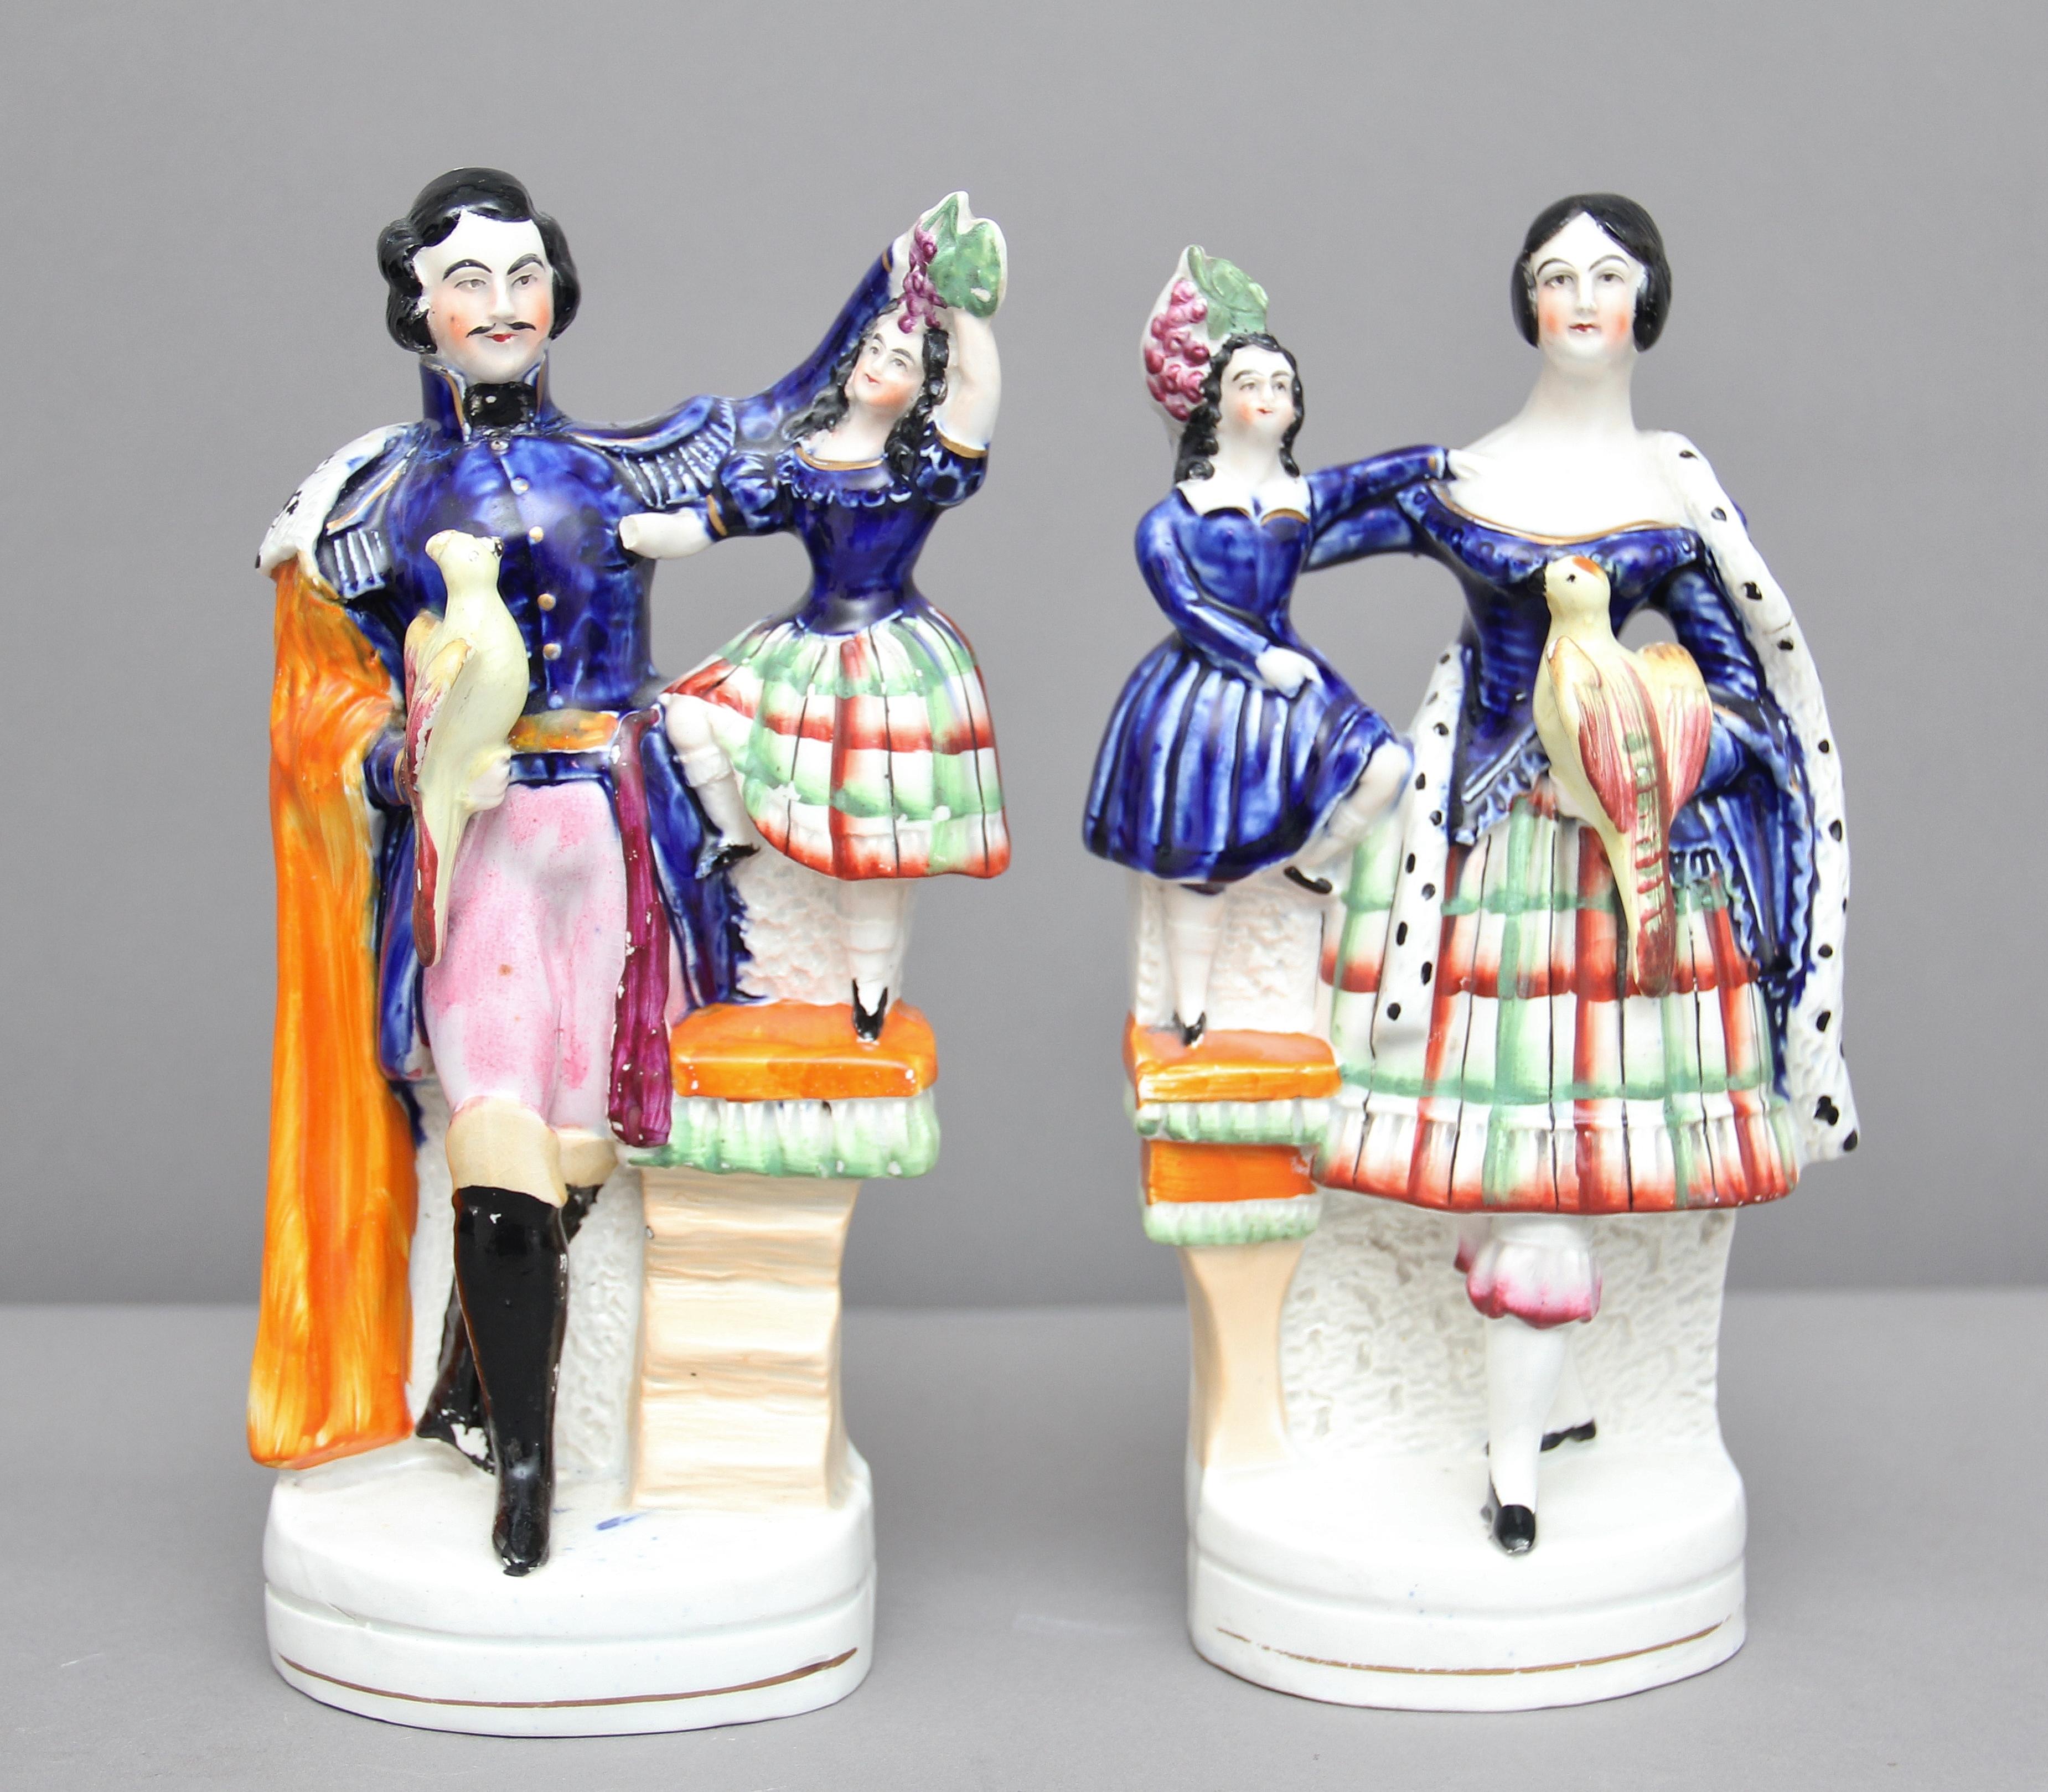 A fabulous rare pair of Staffordshire figures of Queen Victoria with a child and holding a parrot like bird, and Prince Albert also with a child and bird, sadly on this figure the child’s hand is missing, lovely colors and well moulded, circa 1840.